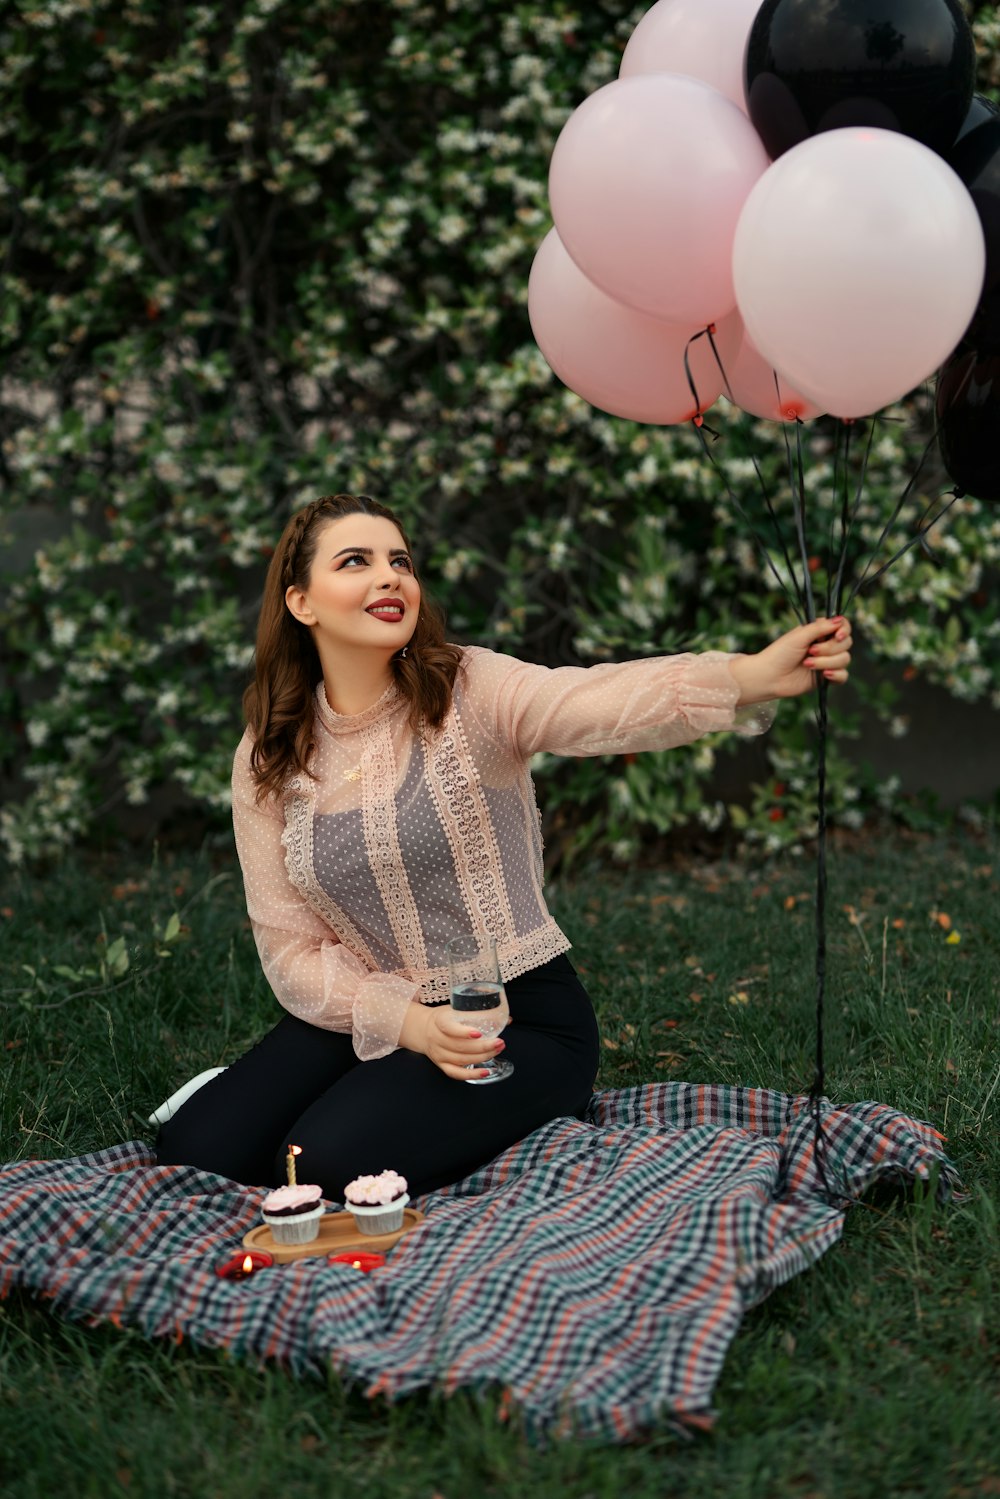 a woman sitting on a blanket holding a bunch of balloons